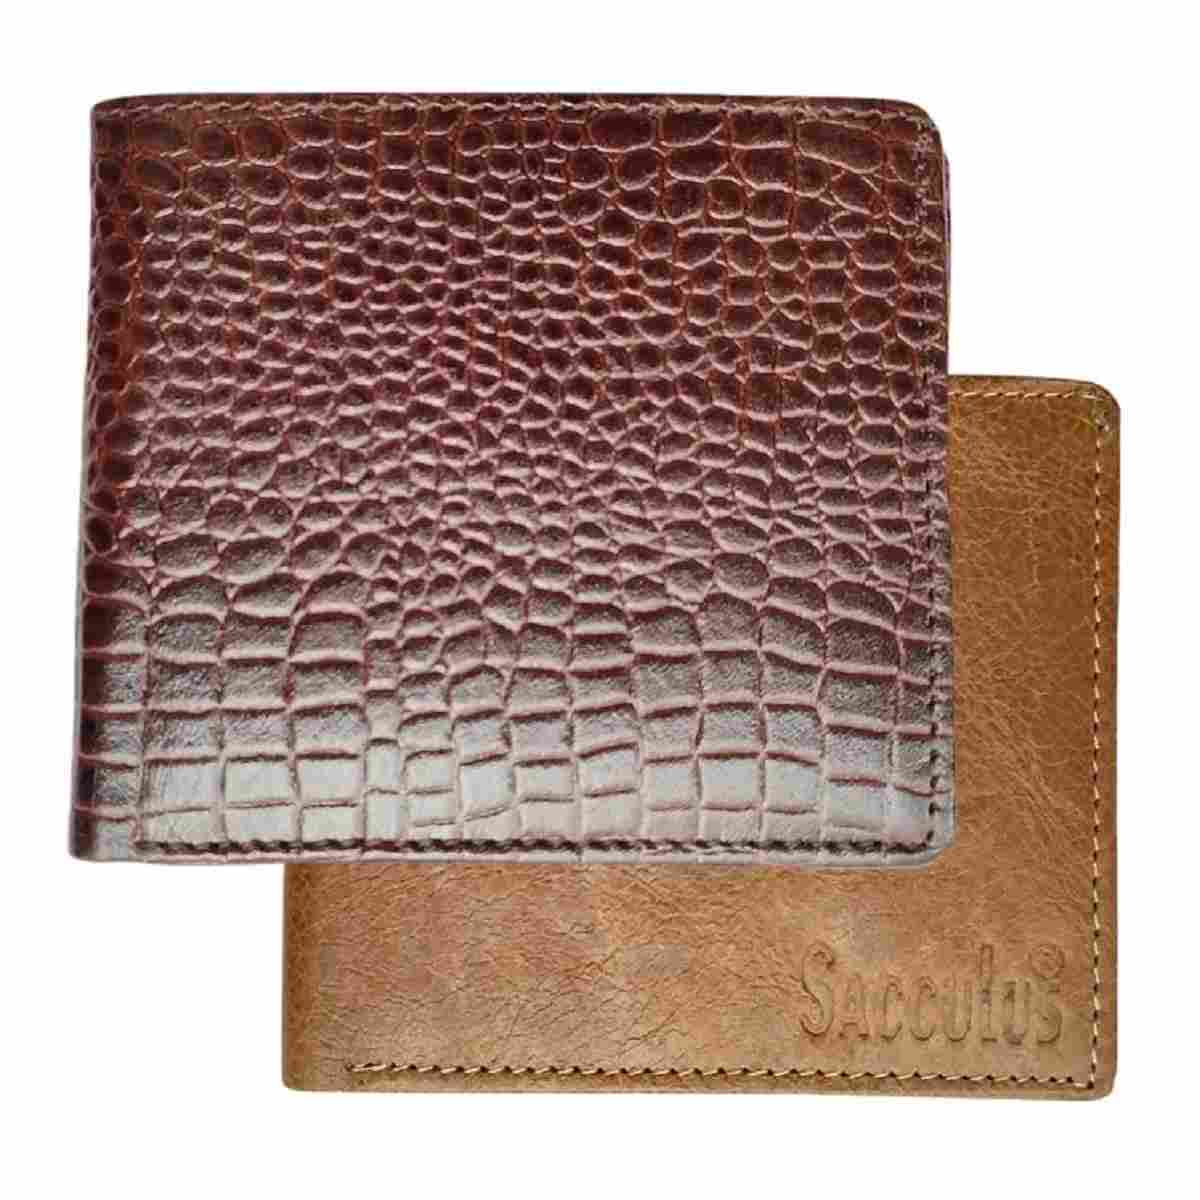 E2015 Genuine Leather Wallets for men Pack of 2